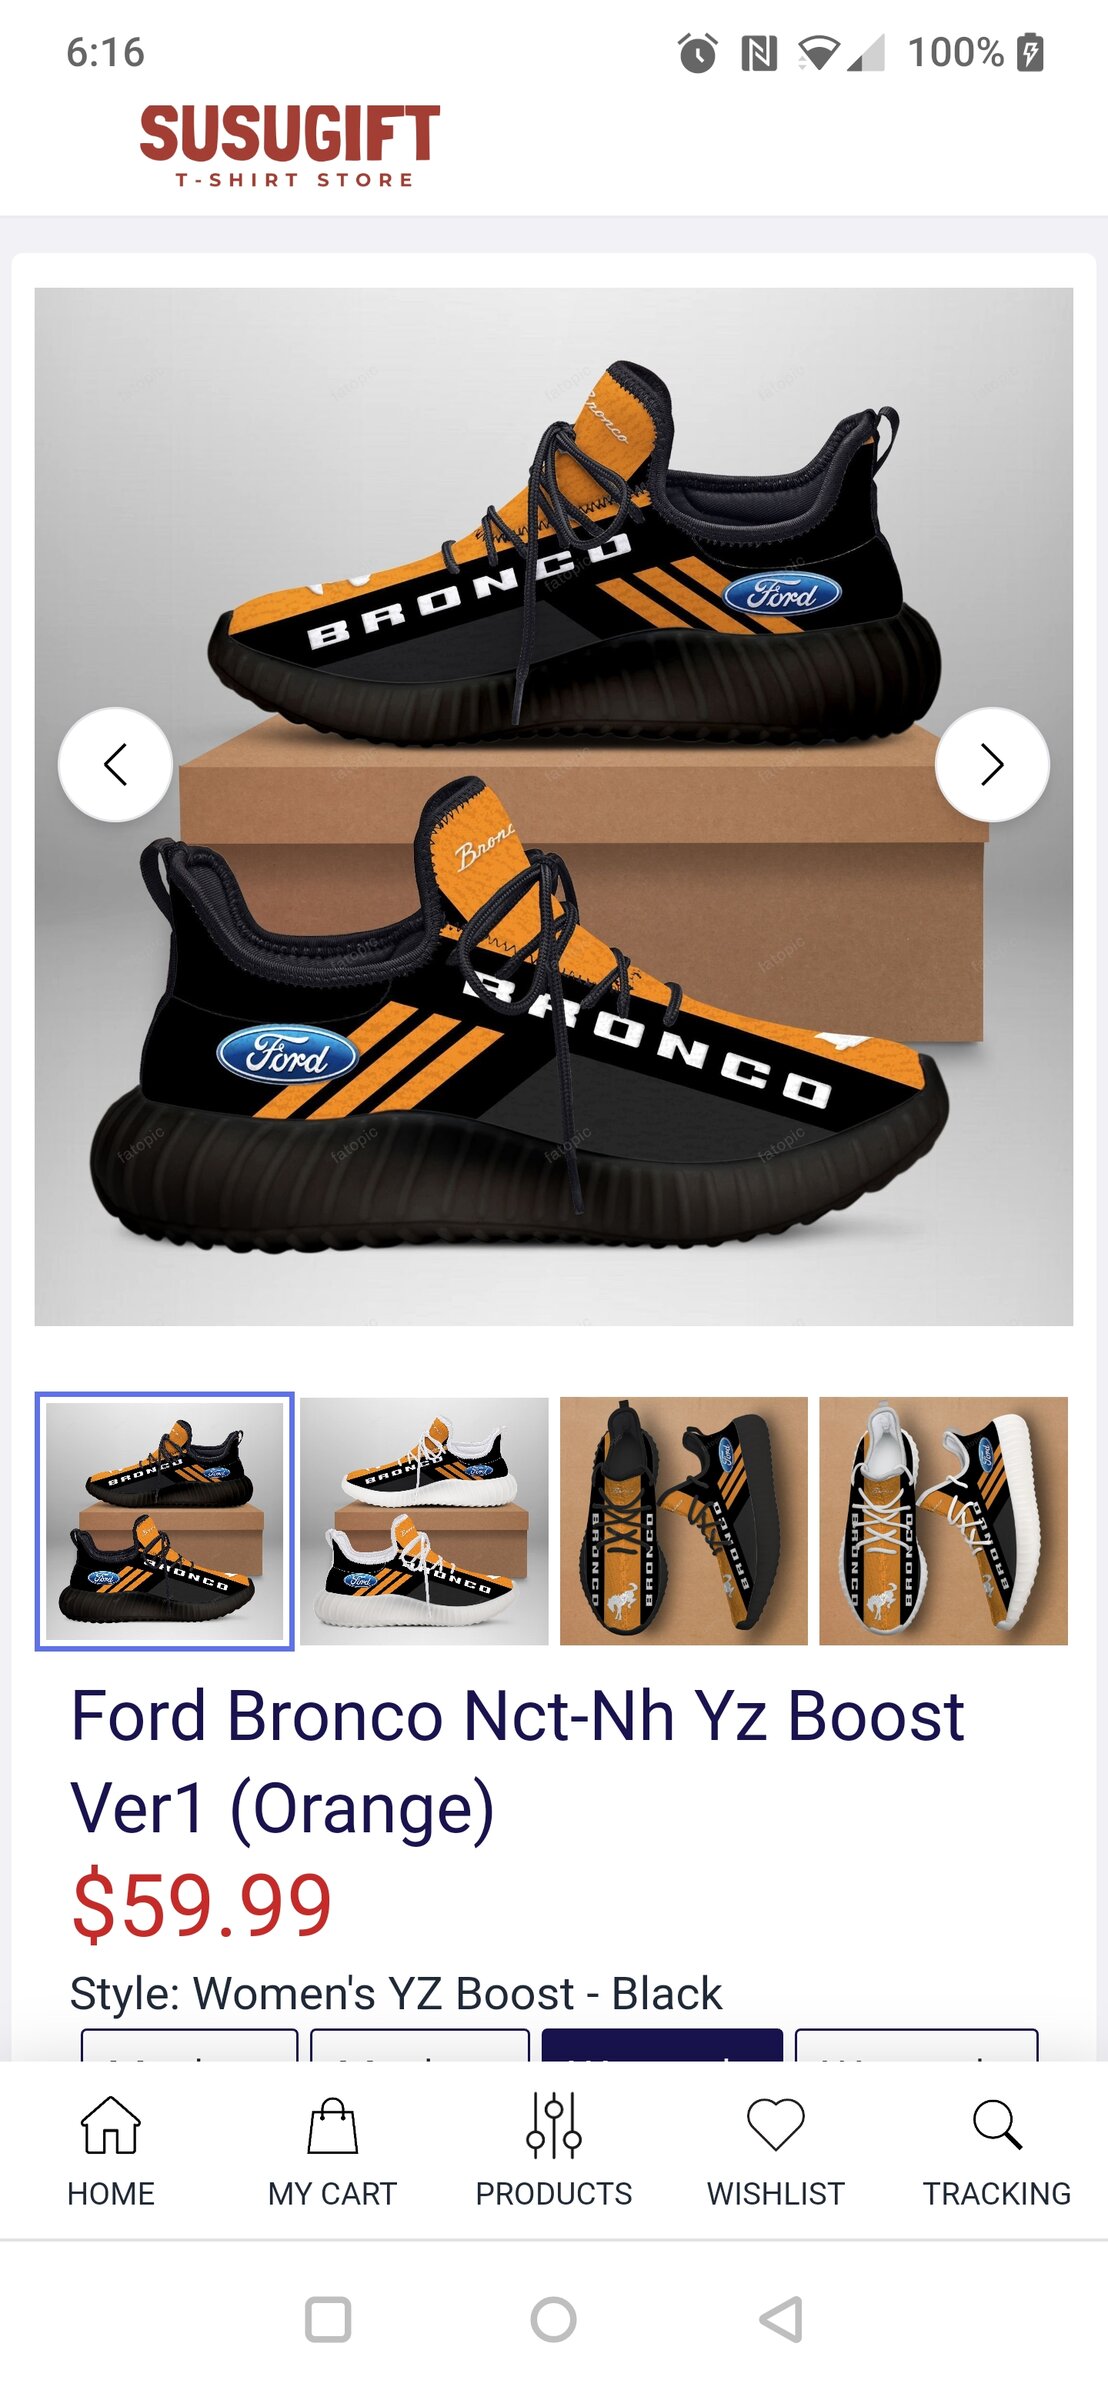 Ford Bronco You might not can drive a Bronco yet but you can wear one! Bronco Yz Boost Sneakers Screenshot_20220525-061614